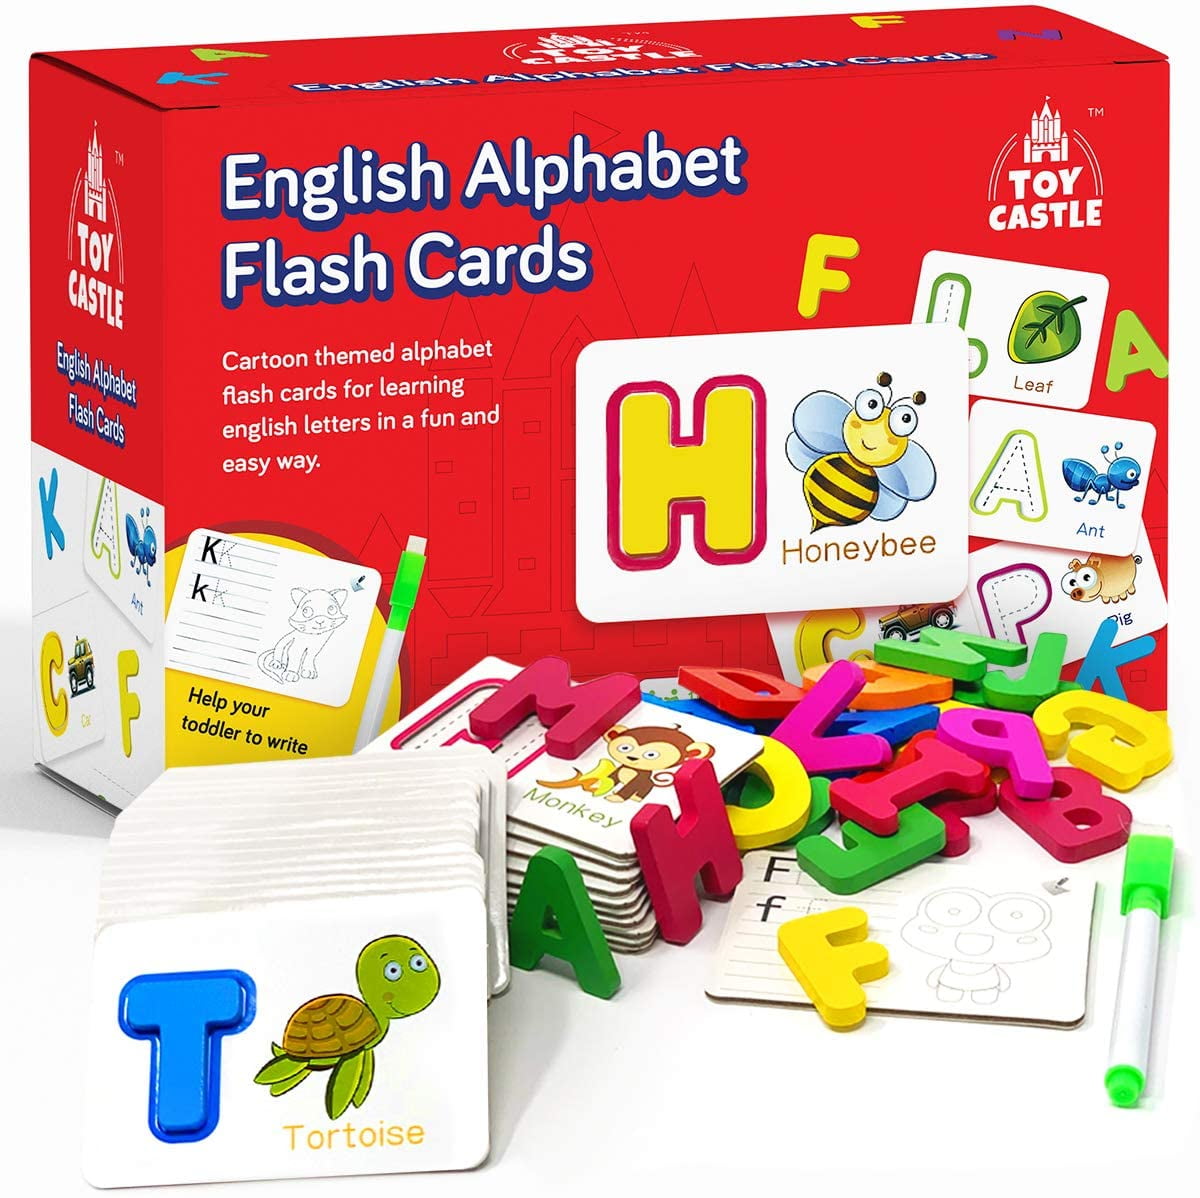 A-Z FLASH CARDS W/ WOODEN BLOCKS SET EDUCATIONAL KIDS TODDLERS STAKING BUILDING 